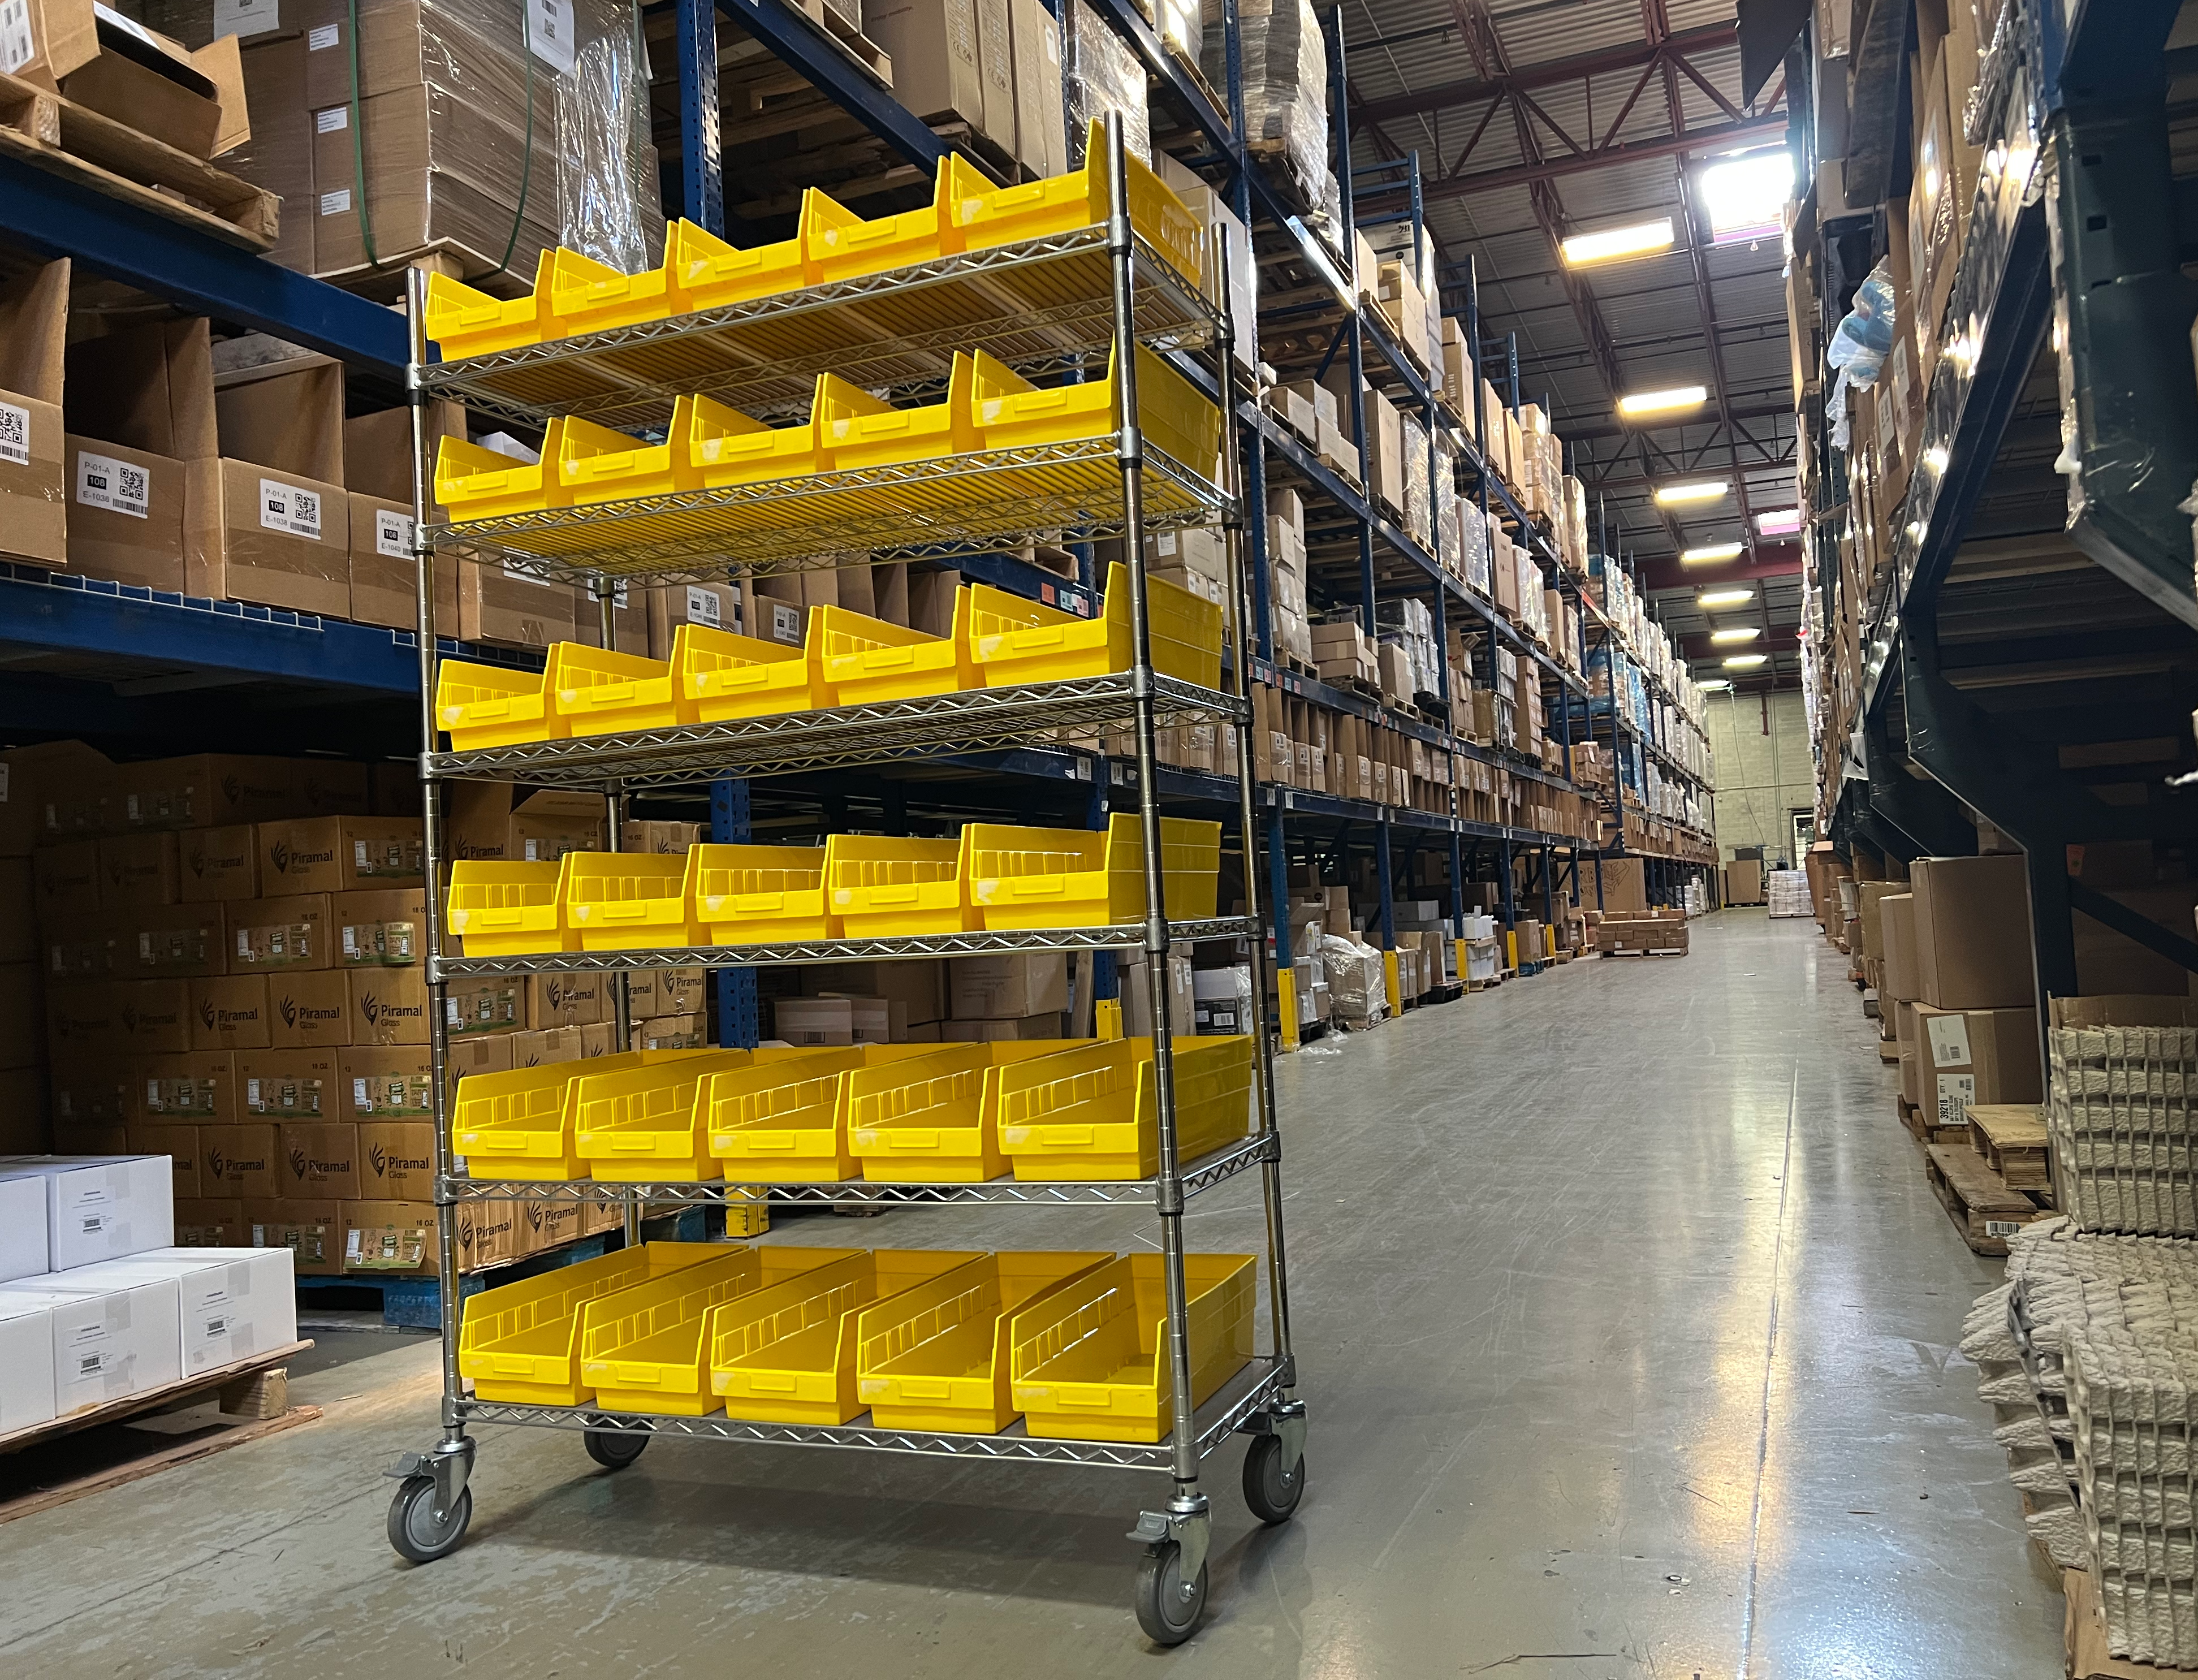 Metal cart full of small yellow bins, in the middle of a warehouse aisle